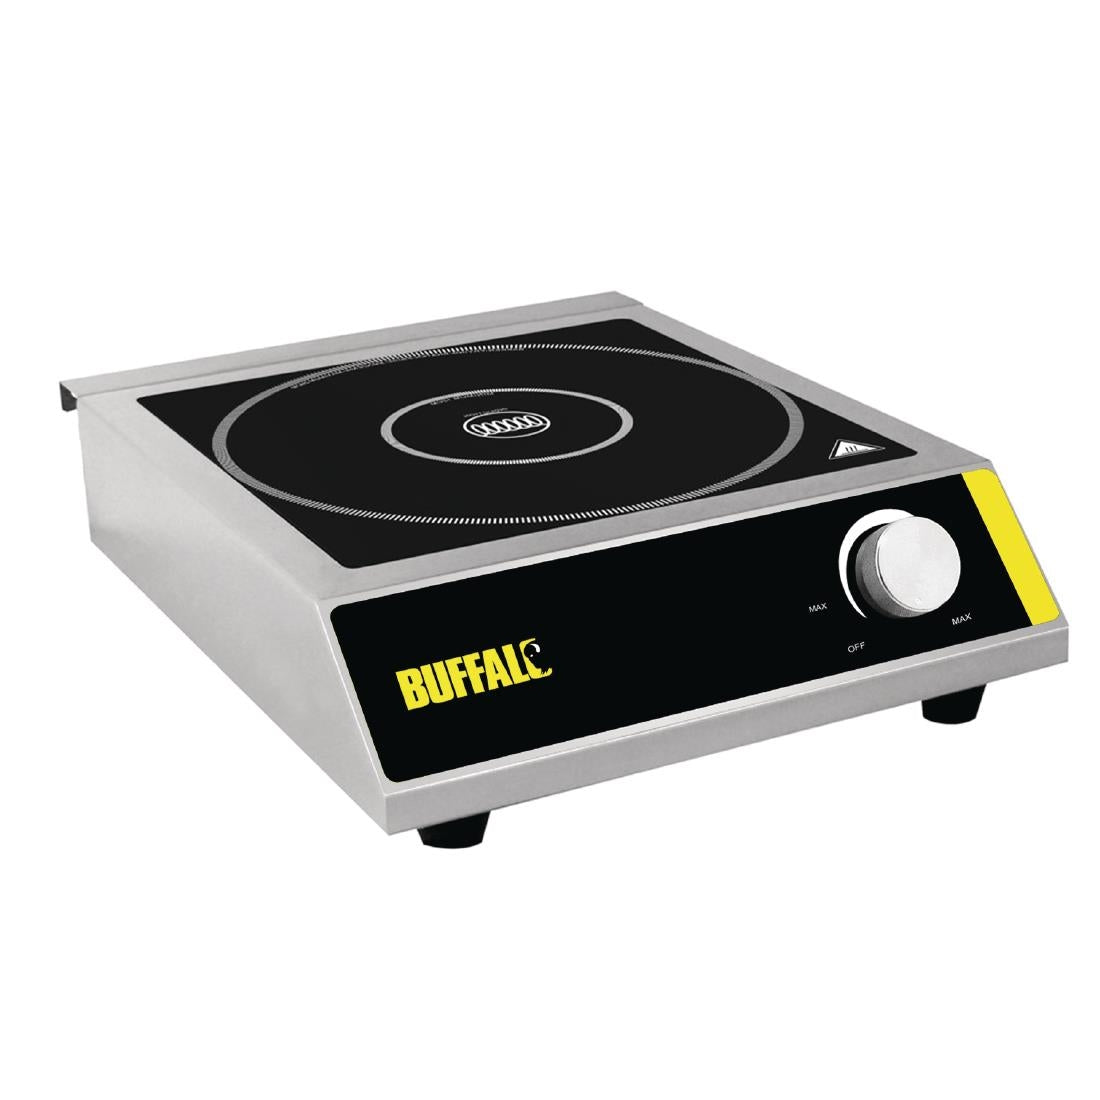 Buffalo Induction Hob 3kW JD Catering Equipment Solutions Ltd